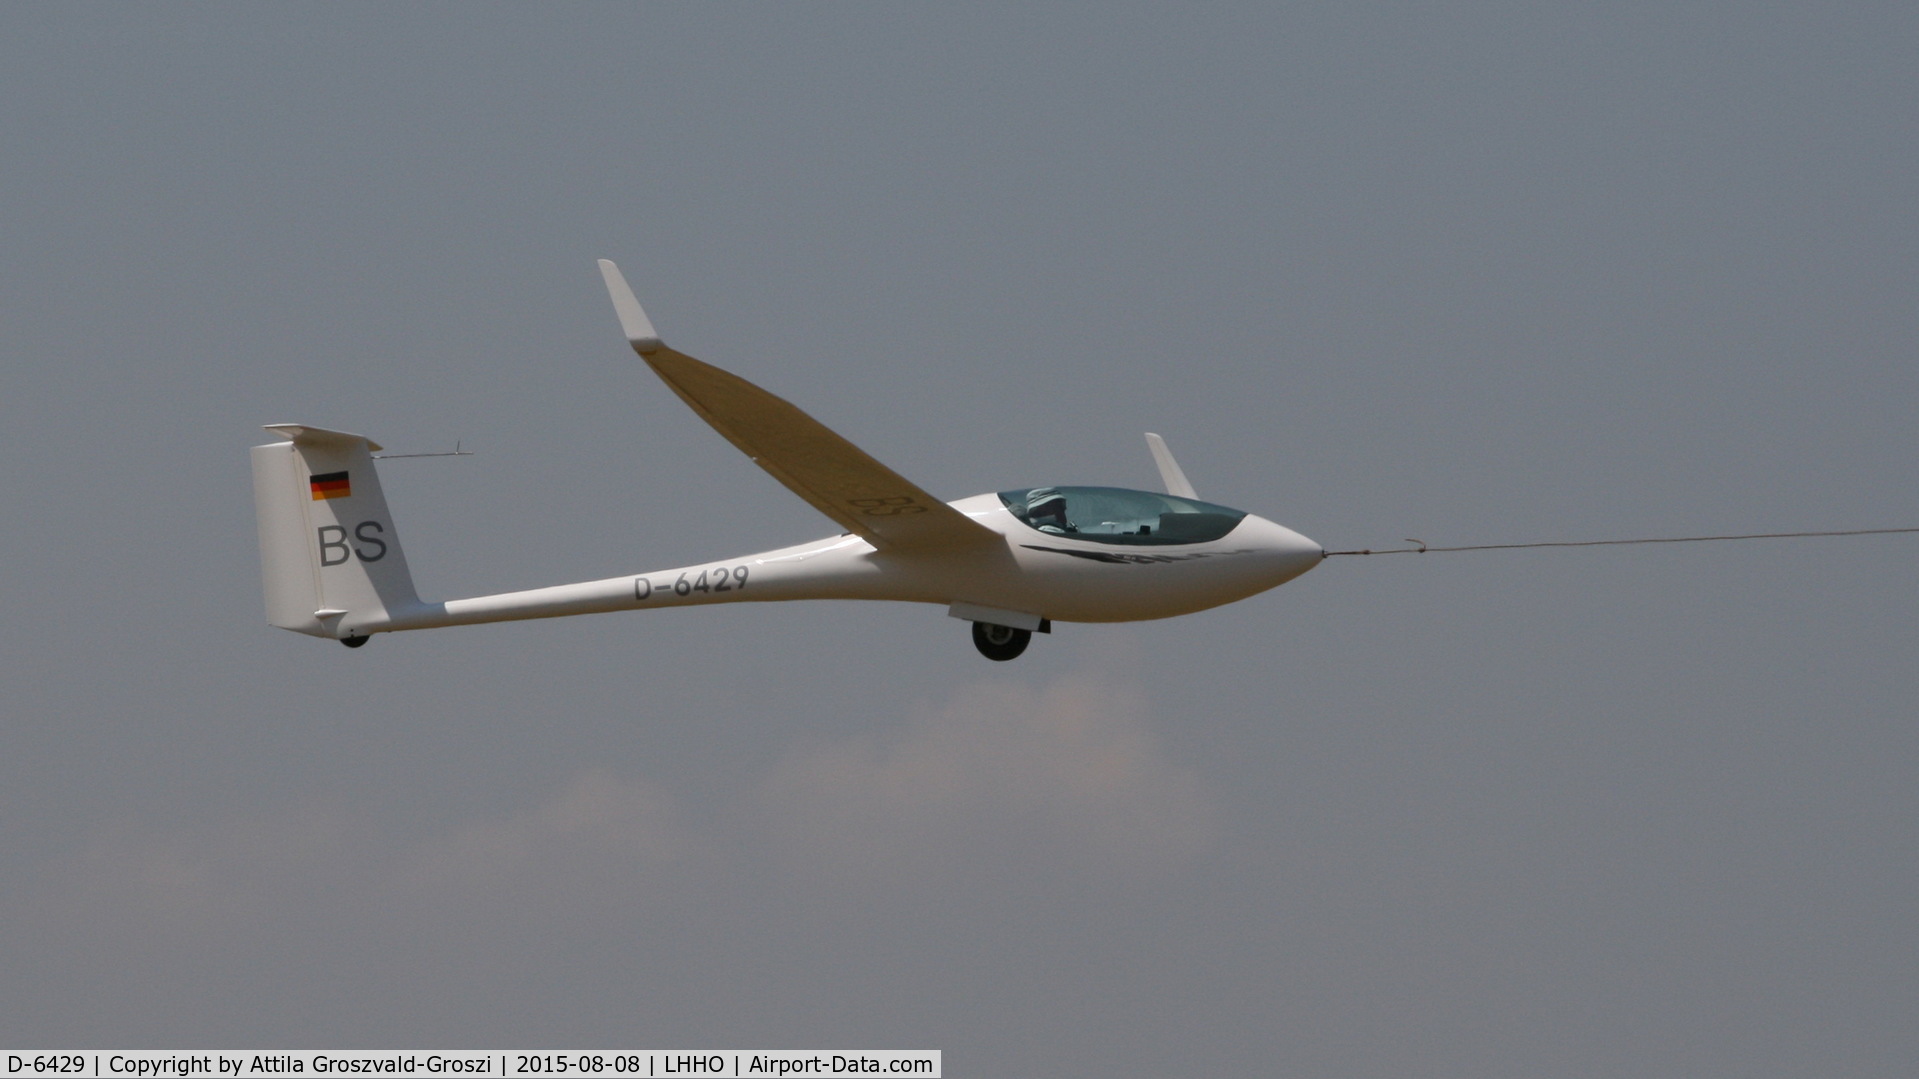 D-6429, 2010 Schleicher ASG-29 C/N 29642, Hajdúszoboszló Airport, Hungary - 60. Hungary Gliding National Championship and third Civis Thermal Cup, 2015